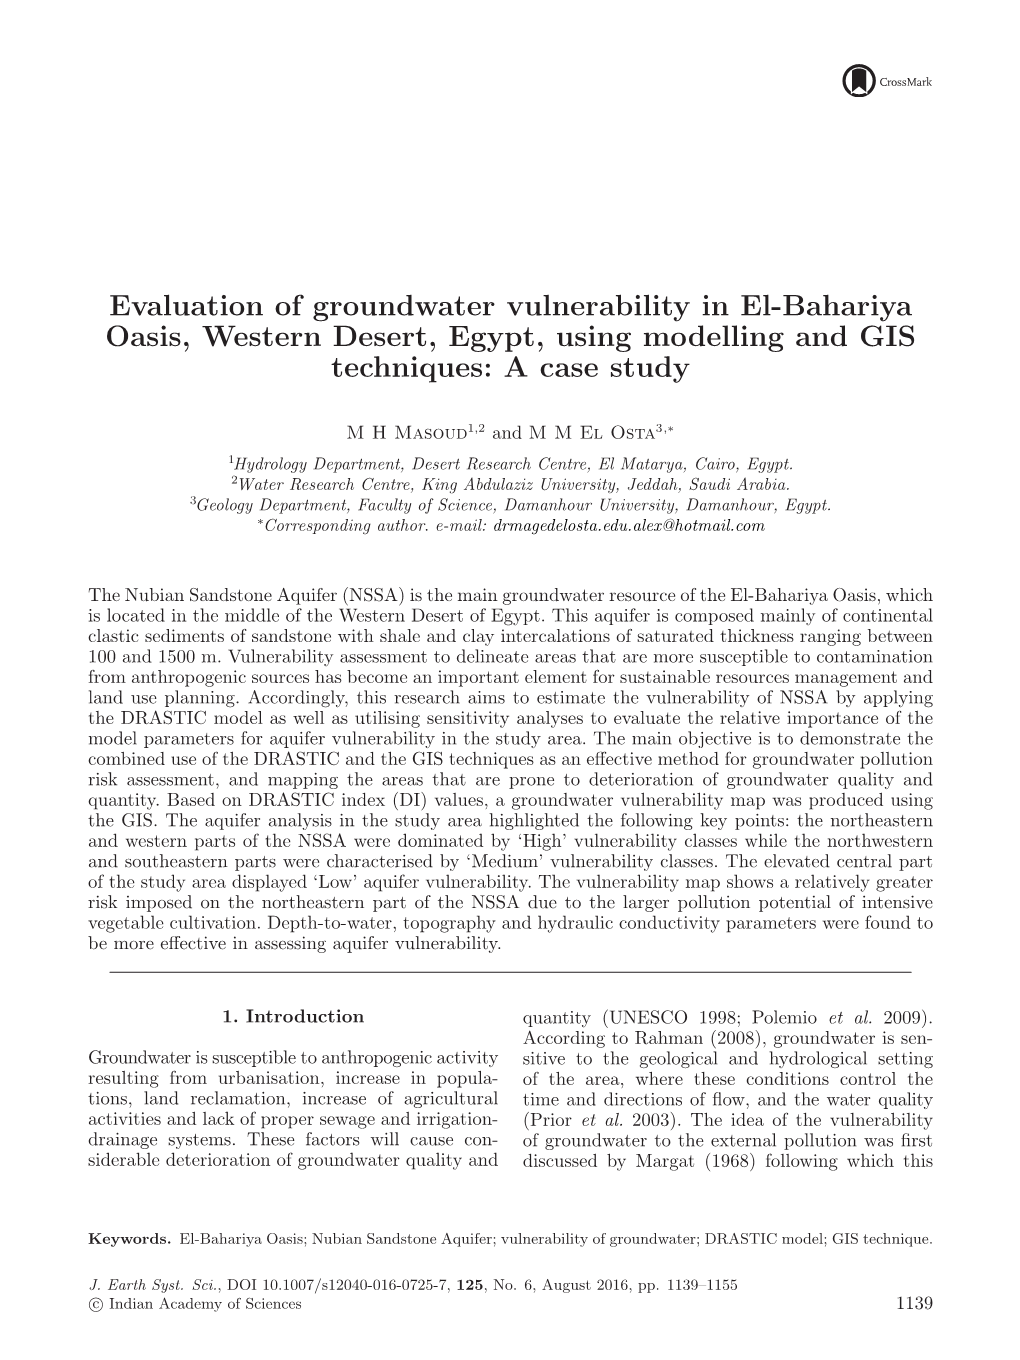 Evaluation of Groundwater Vulnerability in El-Bahariya Oasis, Western Desert, Egypt, Using Modelling and GIS Techniques: a Case Study